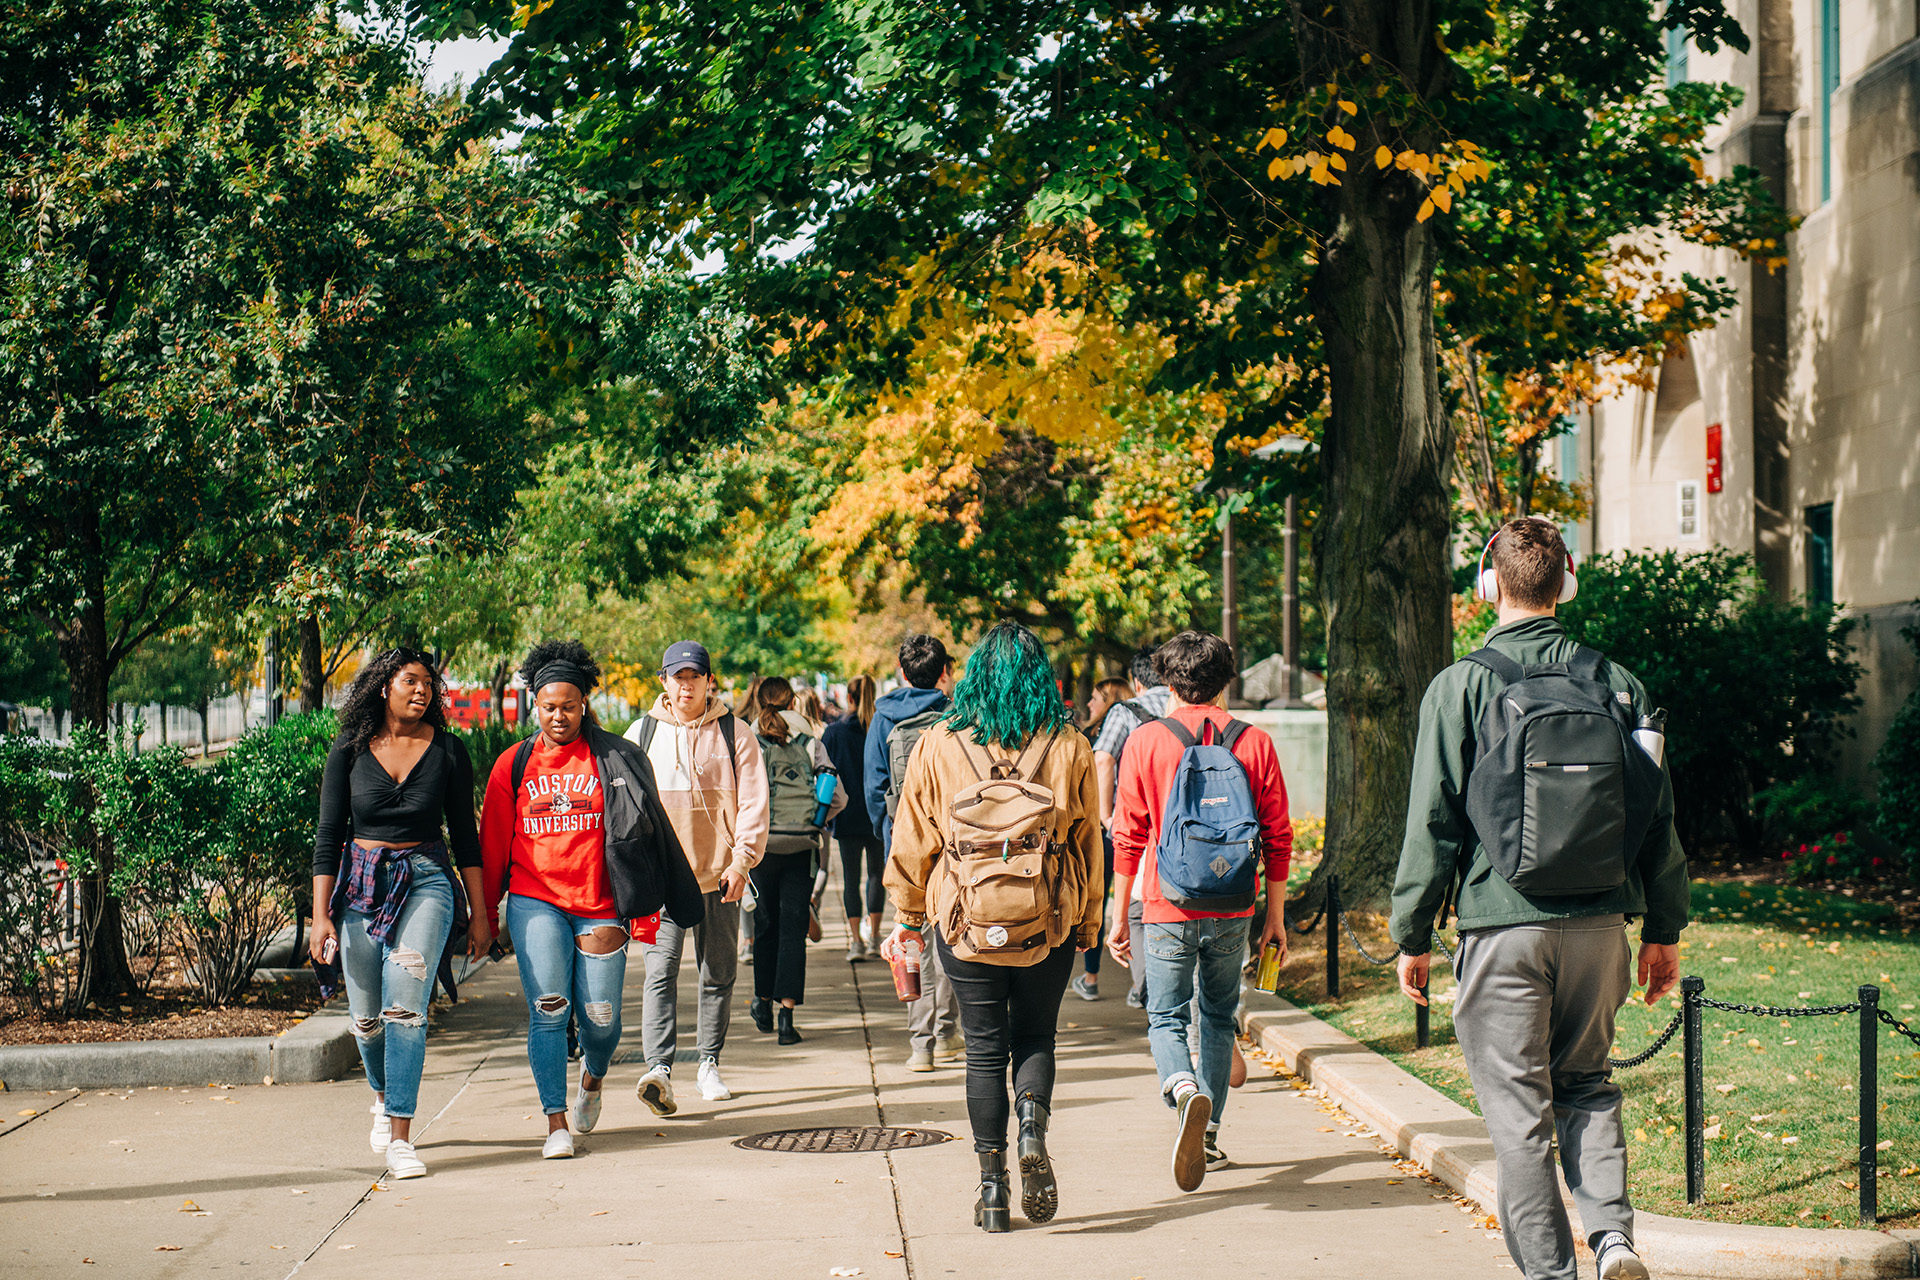 BU Students walking down Comm ave during the fall.